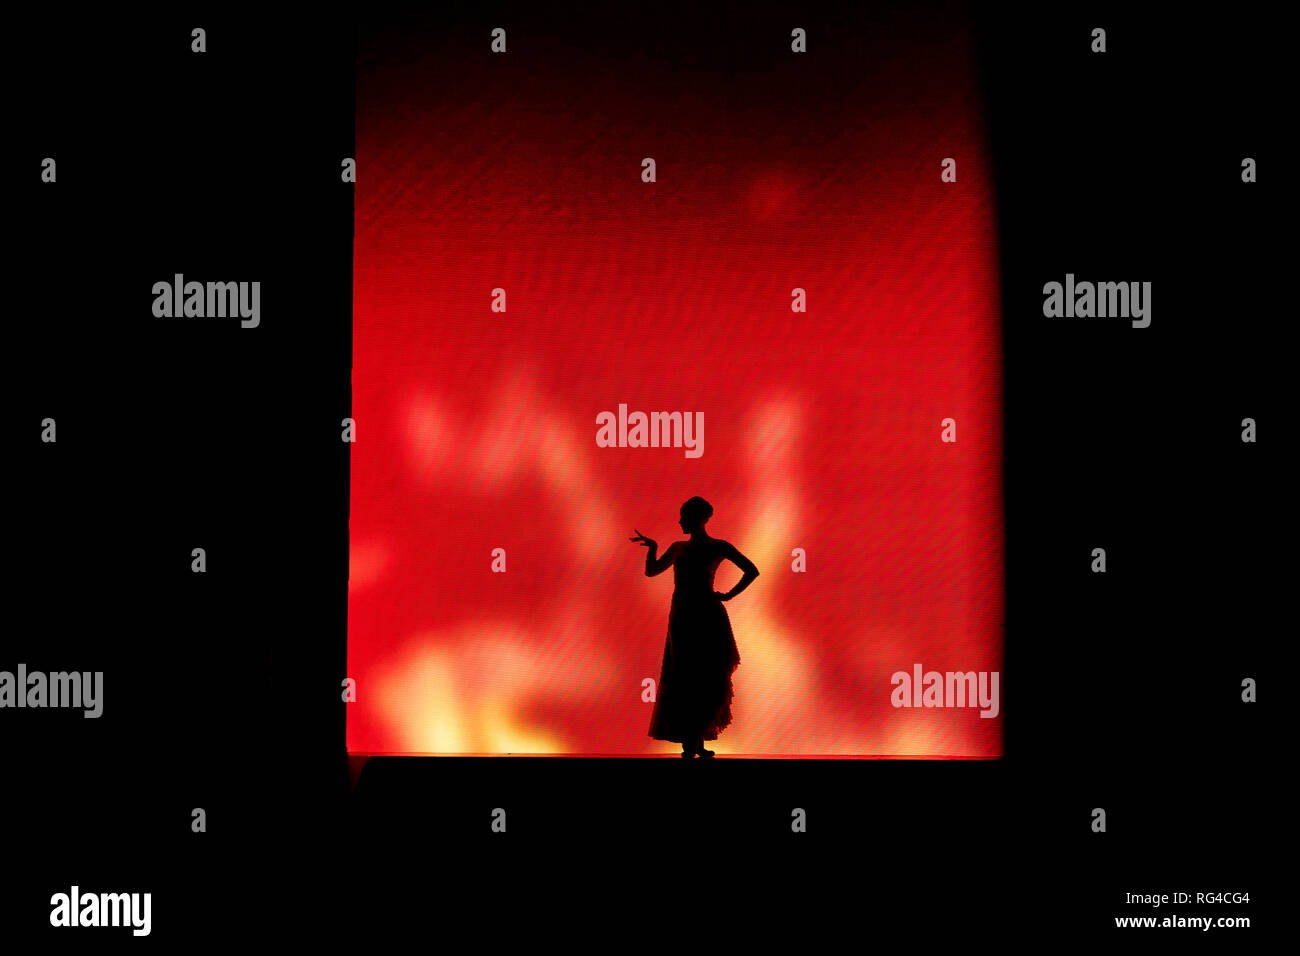 Woman silhouette figure against a red screen, Dublin, Ireland, Europe Stock Photo